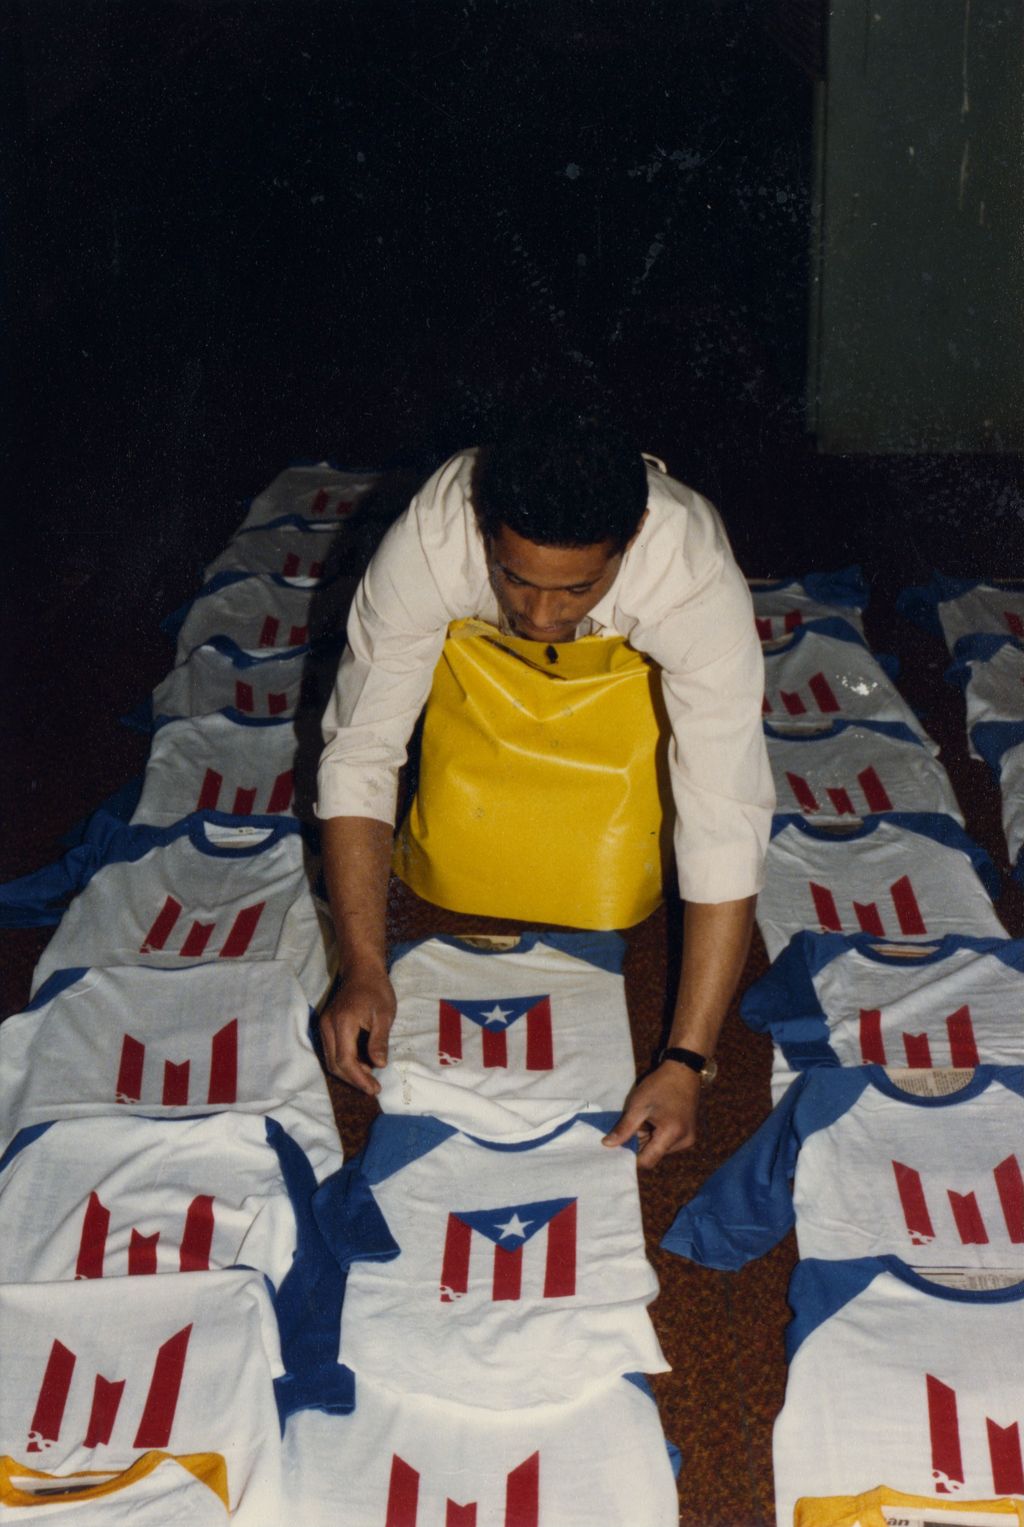 Miniature of Student with screenprinted Puerto Rican flag tshirts